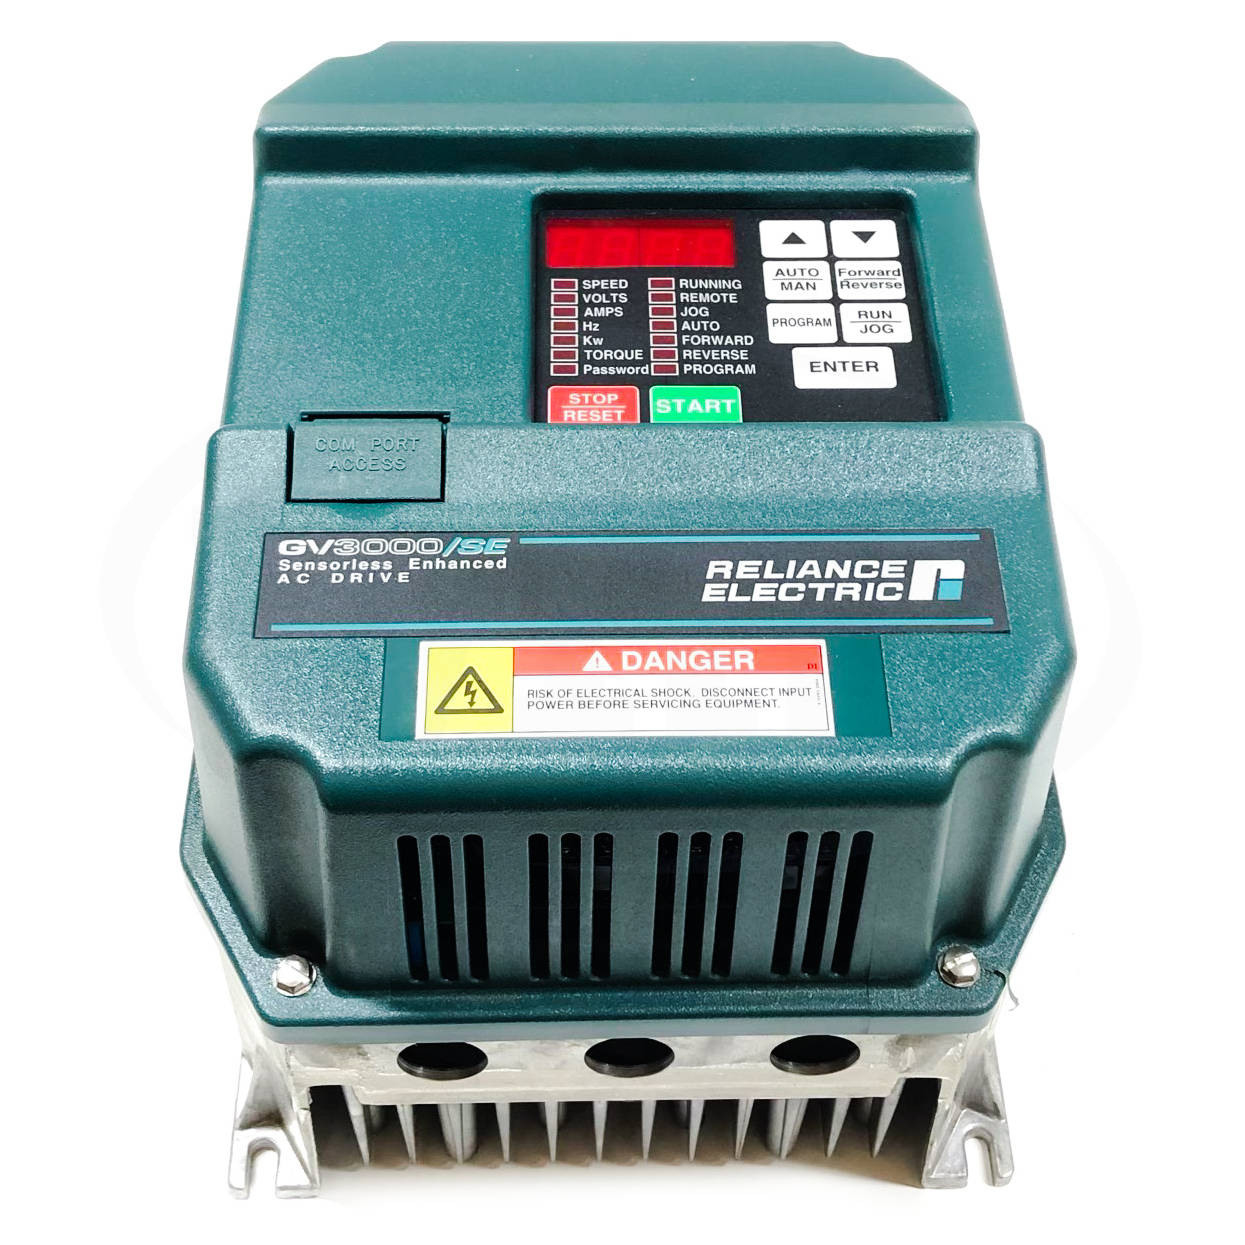 1SU21005 Reliance Electric SP500 3.5/5HP Variable Frequency Drive, 200-230VAC 1